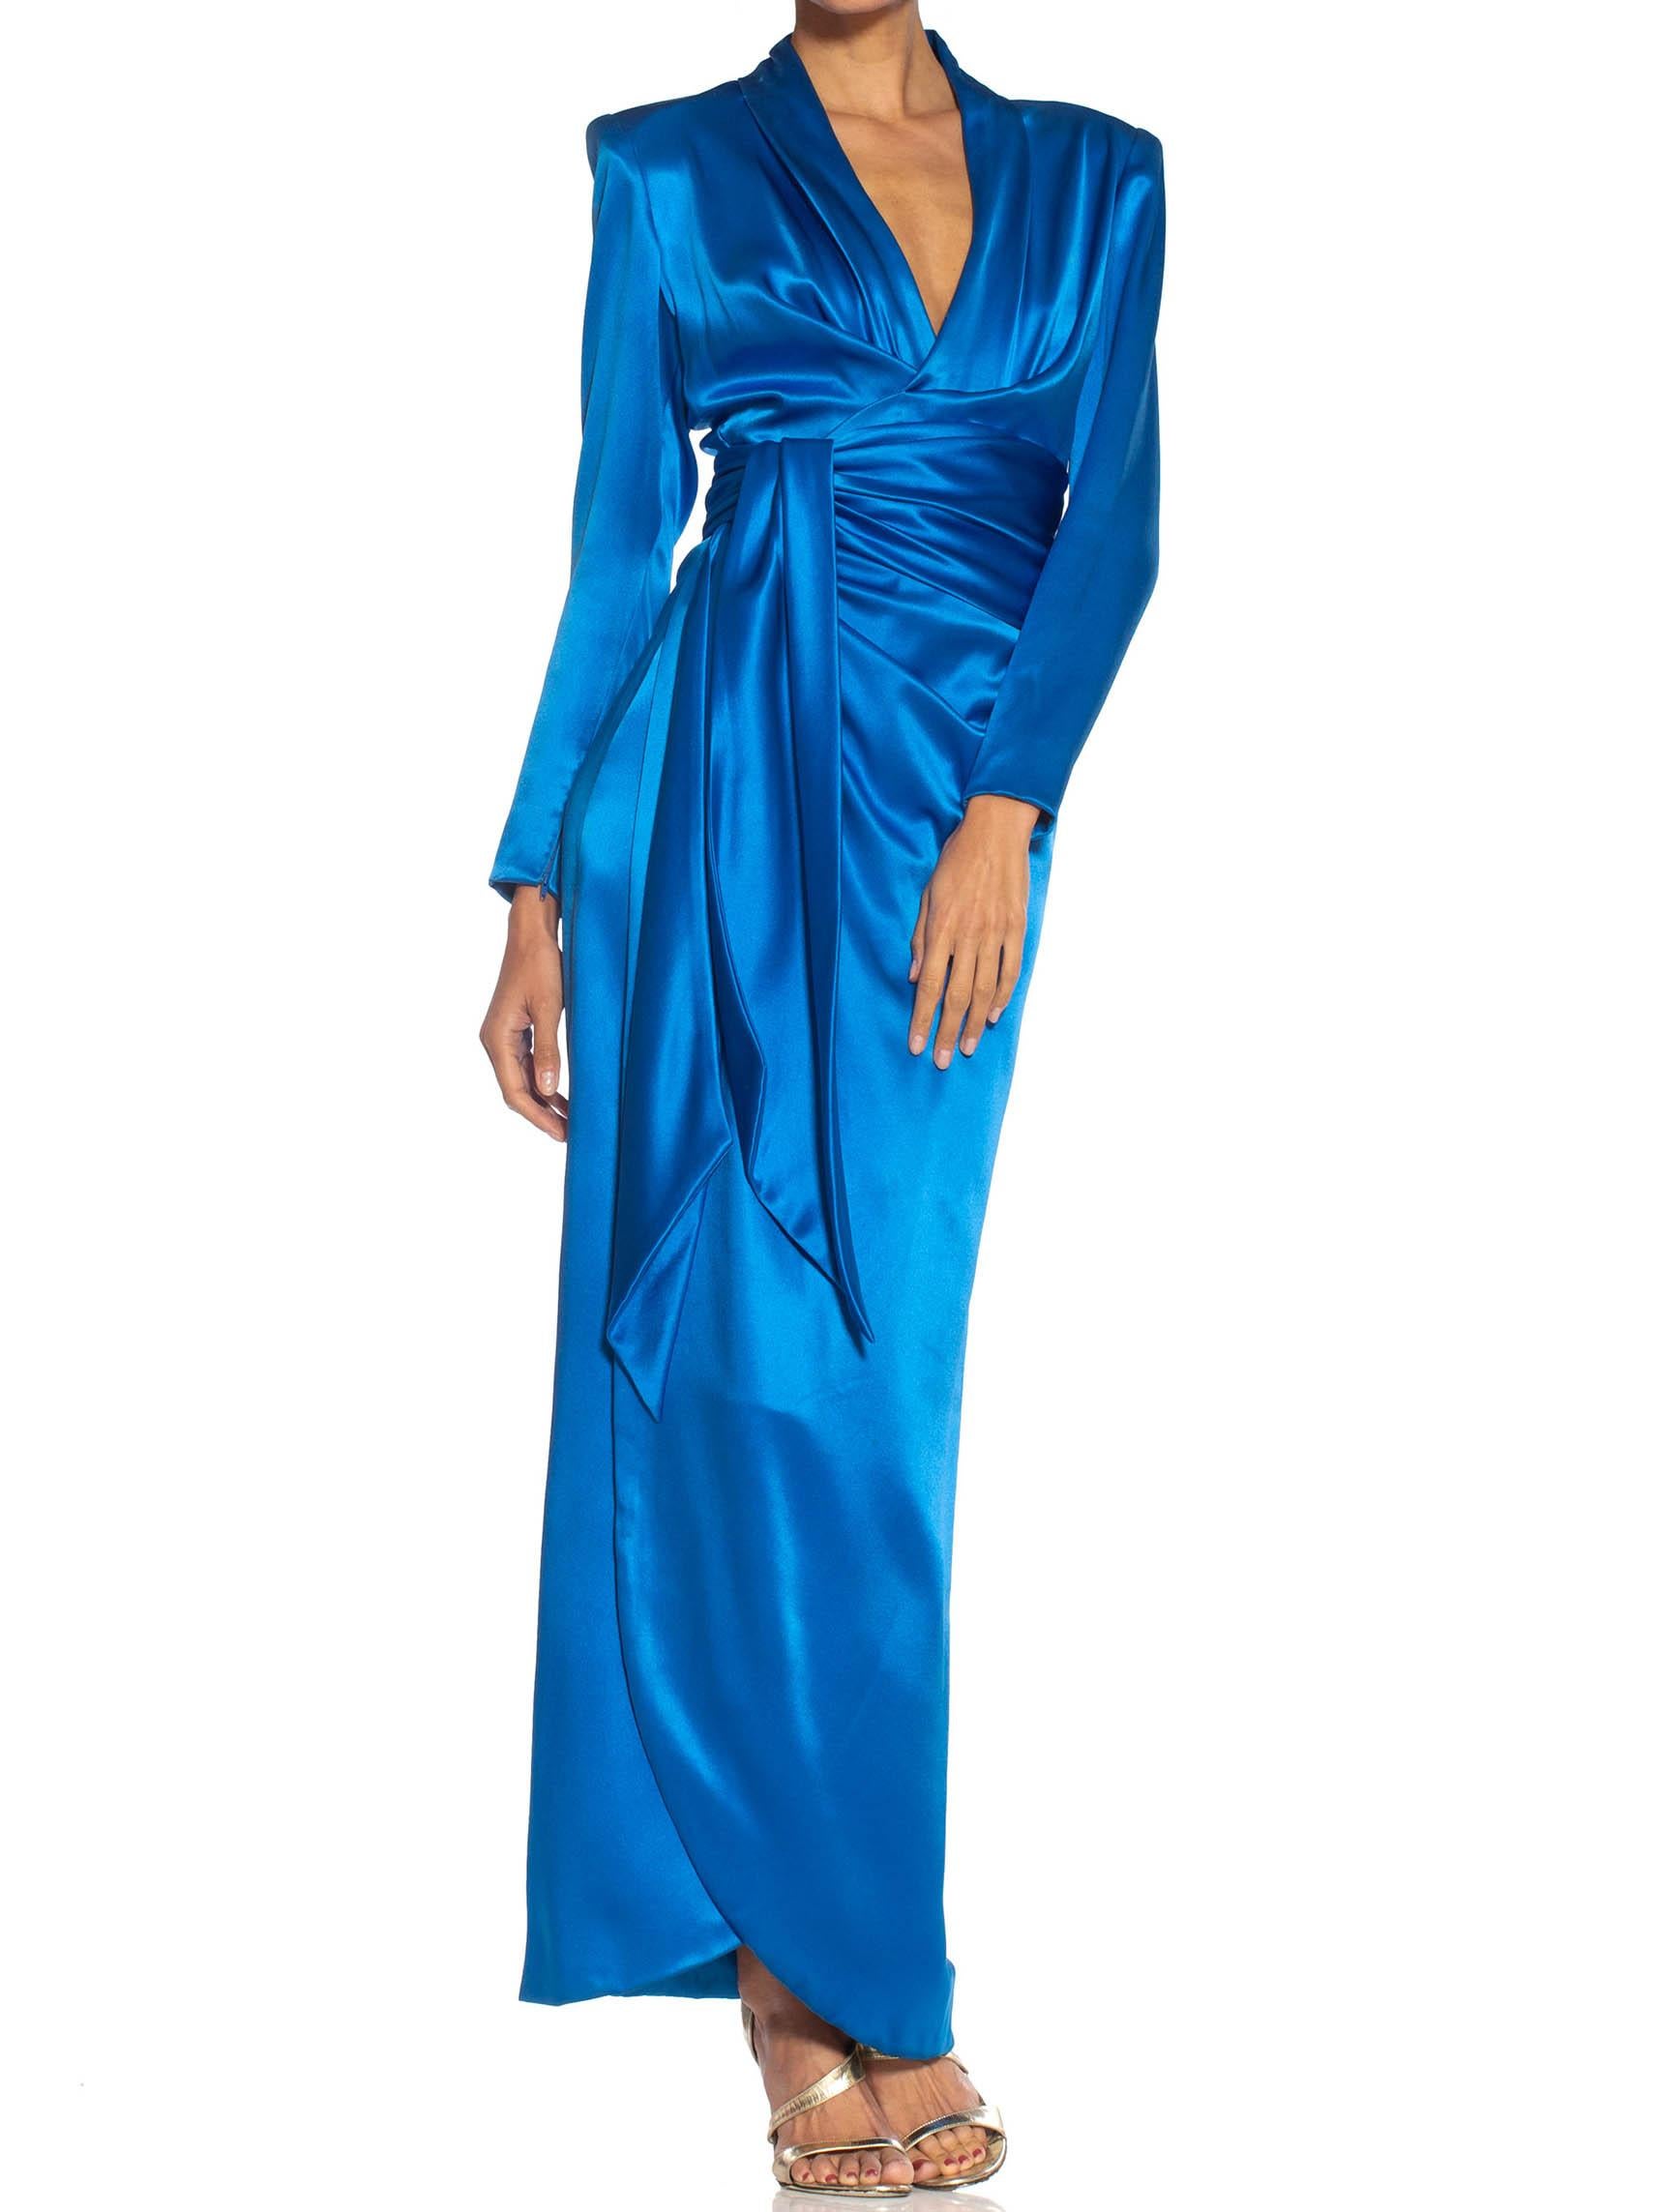 1980S GIVENCHY Electric Blue Haute Couture Silk Double Faced Satin Sleeved Gown For Sale 2